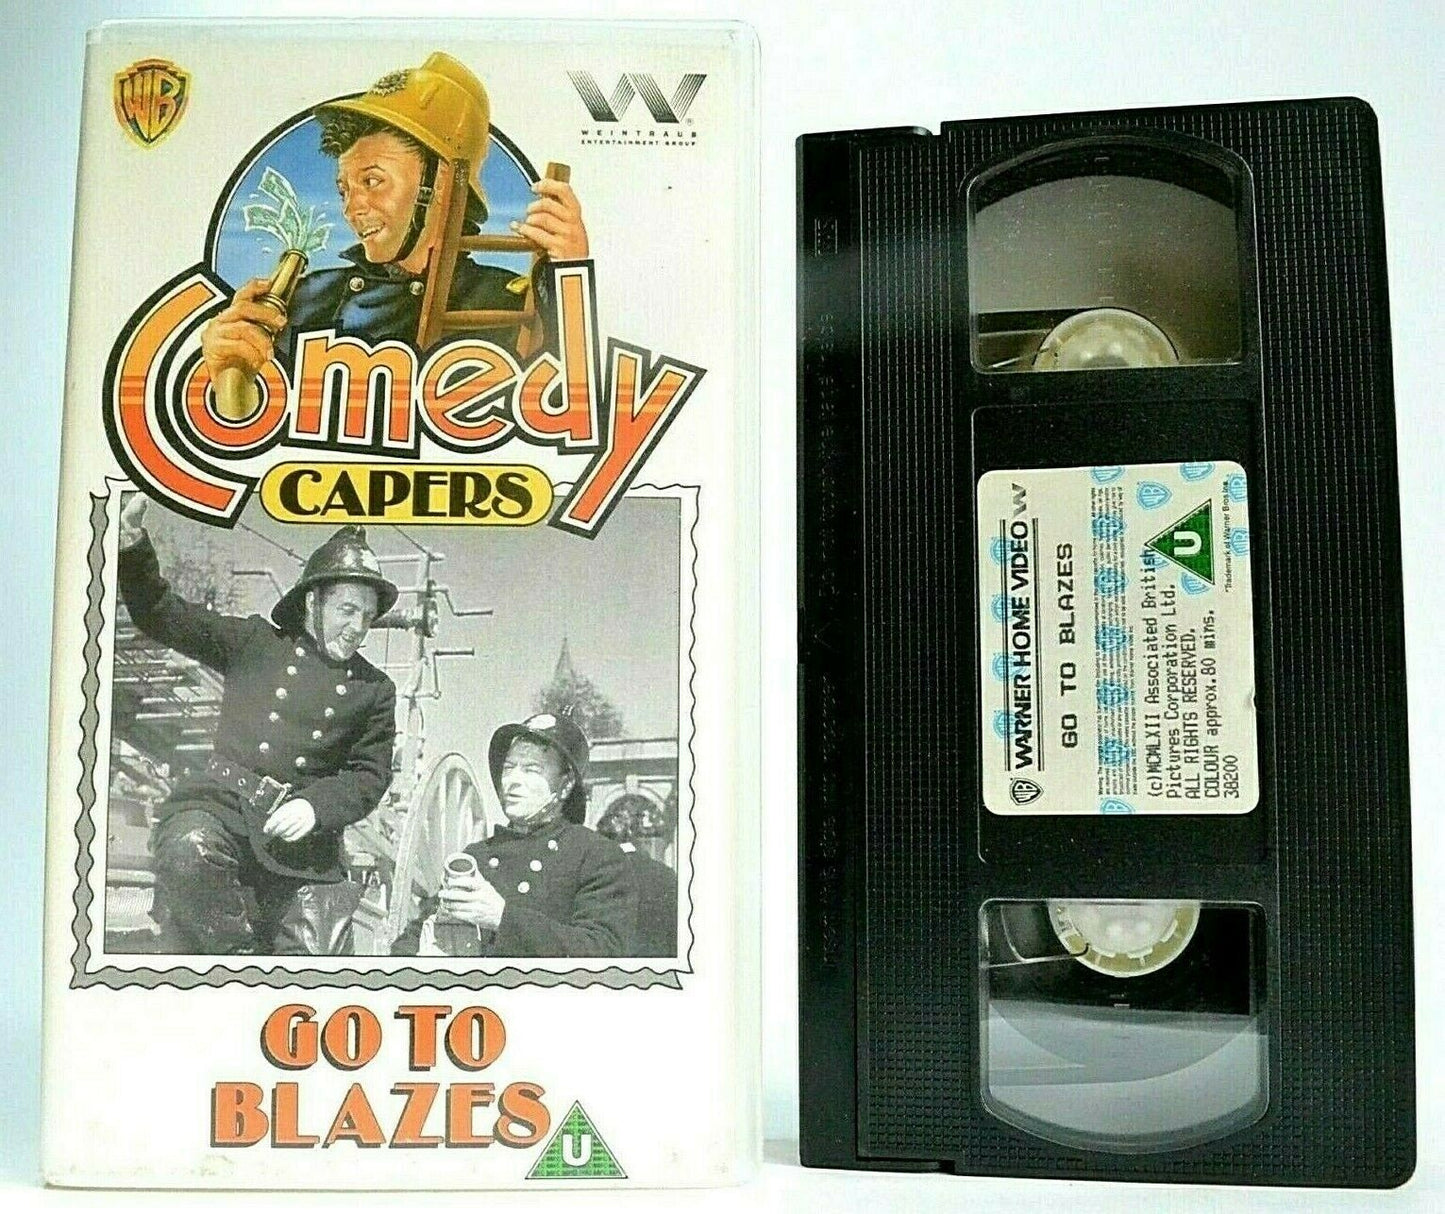 Go to Blazes (1962); [Comedy Capers] -< Dave King / Robert Morley> - Pal VHS-